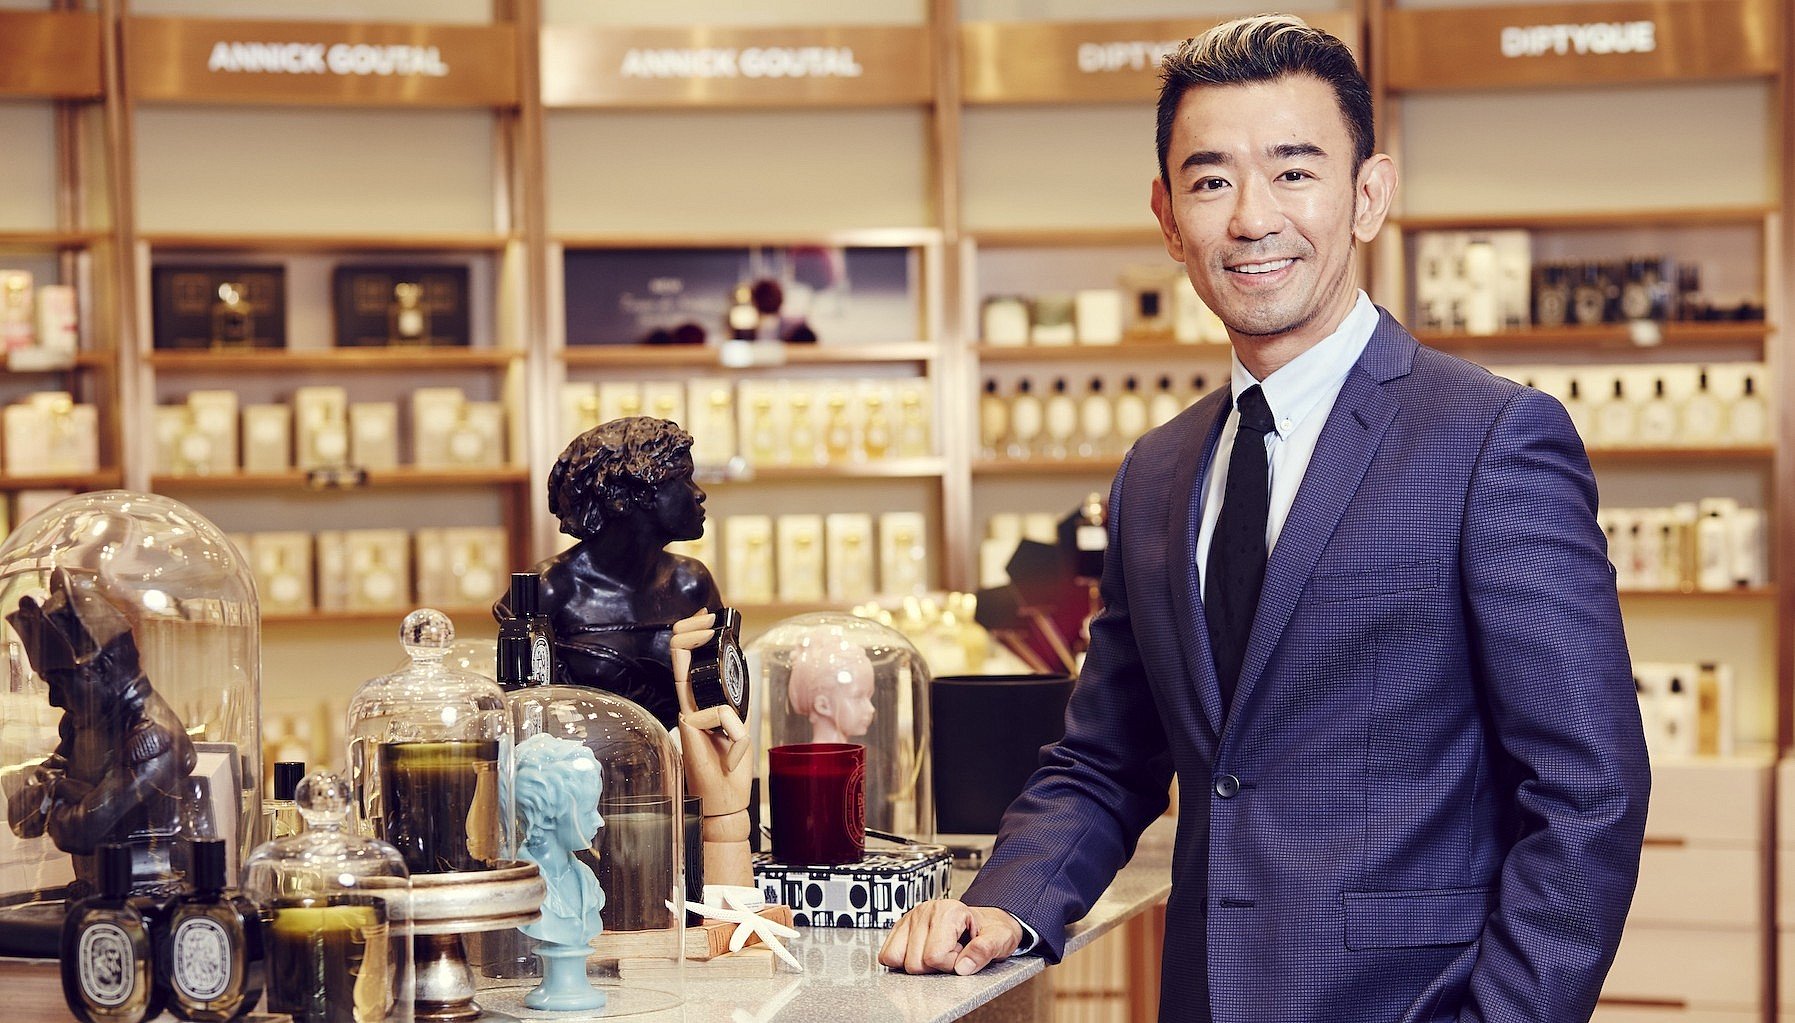 Ken Lim, founder and managing director of Kens Apothecary